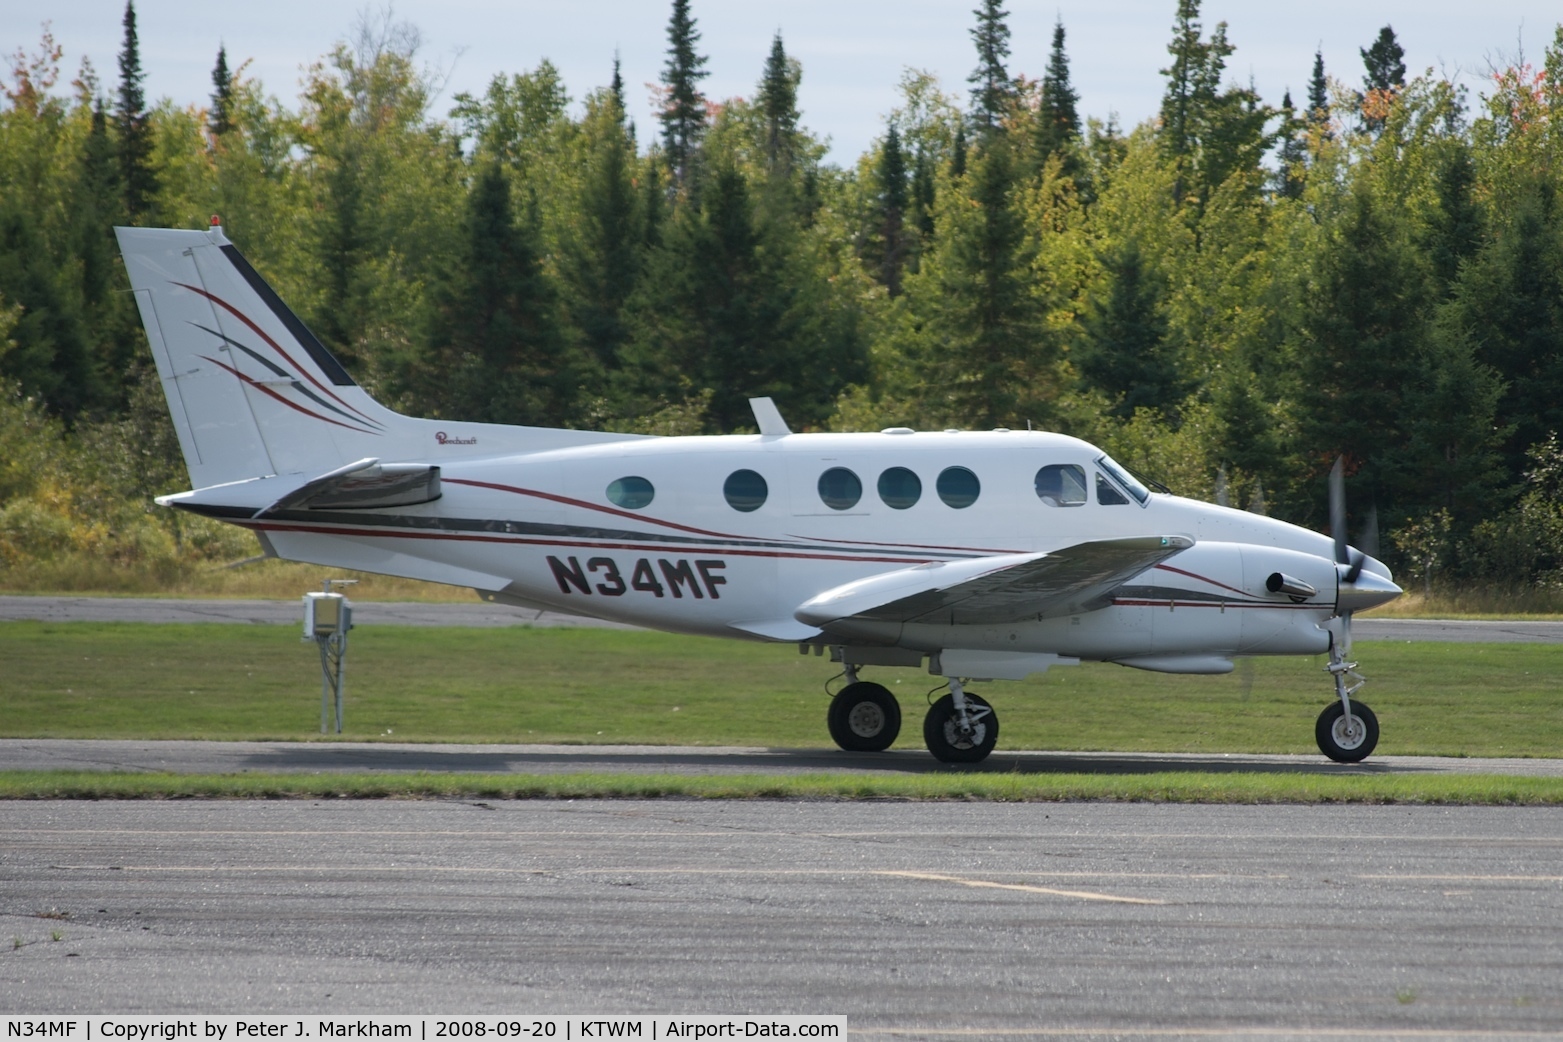 N34MF, 1975 Beech E-90 King Air C/N LW-163, A Beech E-90 taxiing to the runway at Two Harbors Airport.